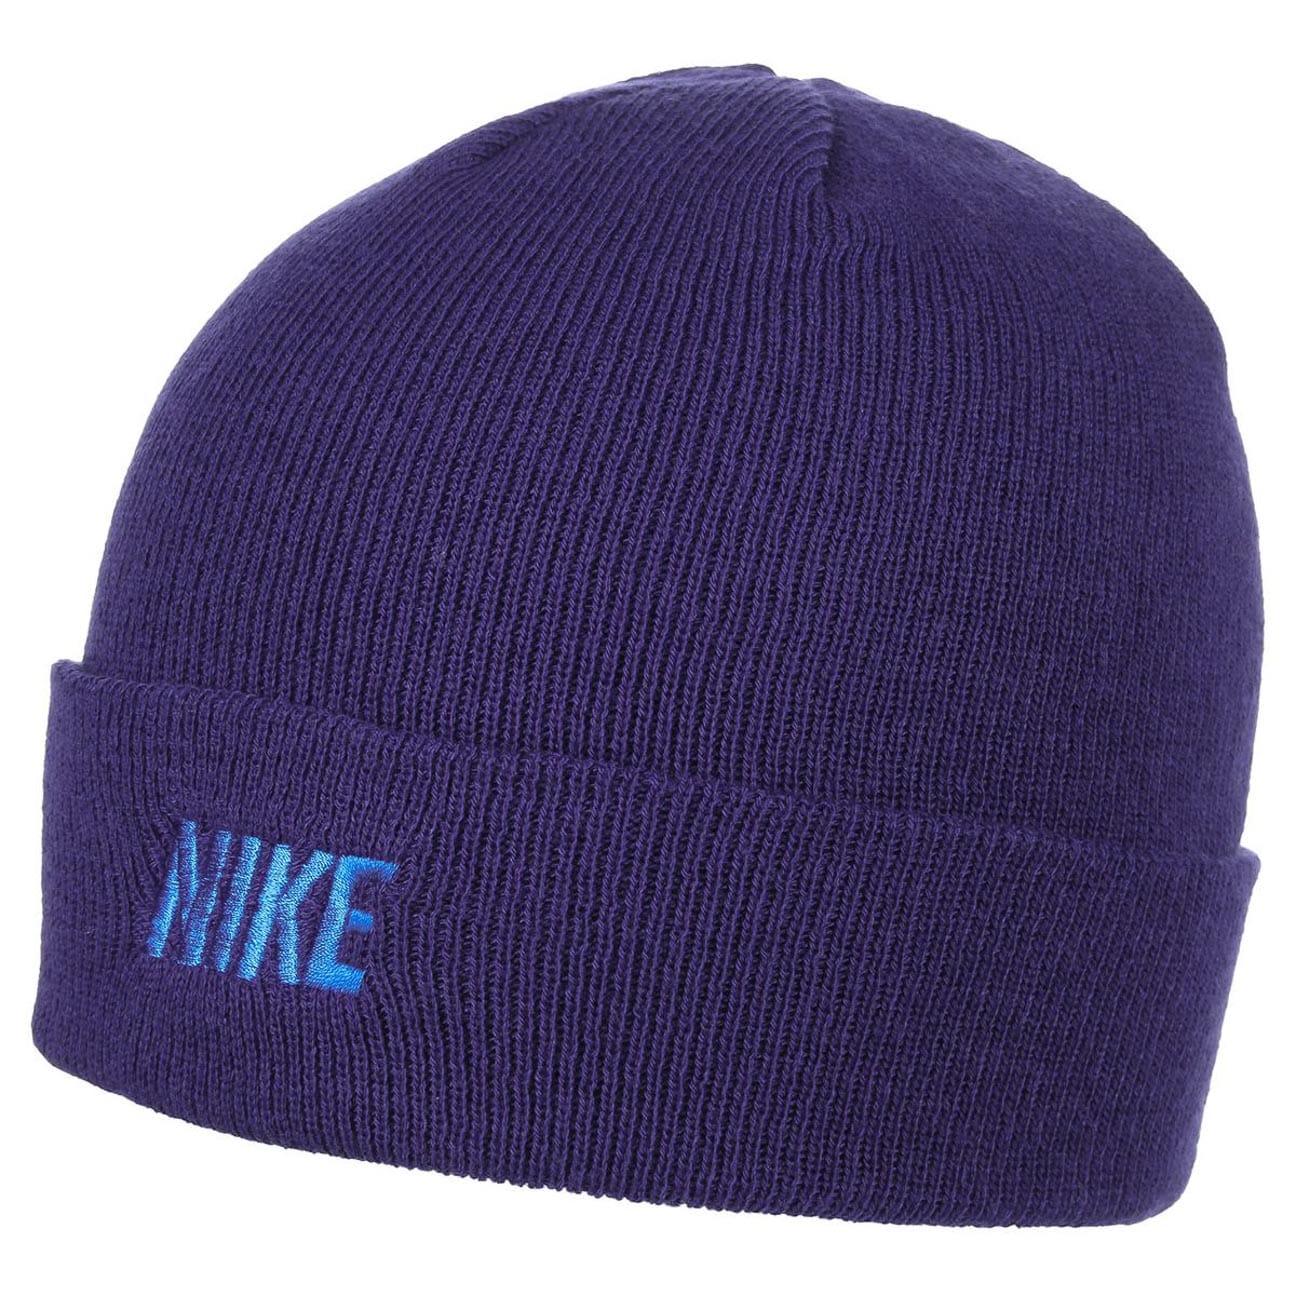 Iconic Winter Knit Hat by Nike, EUR 19,95 --> Hats, caps & beanies shop ...